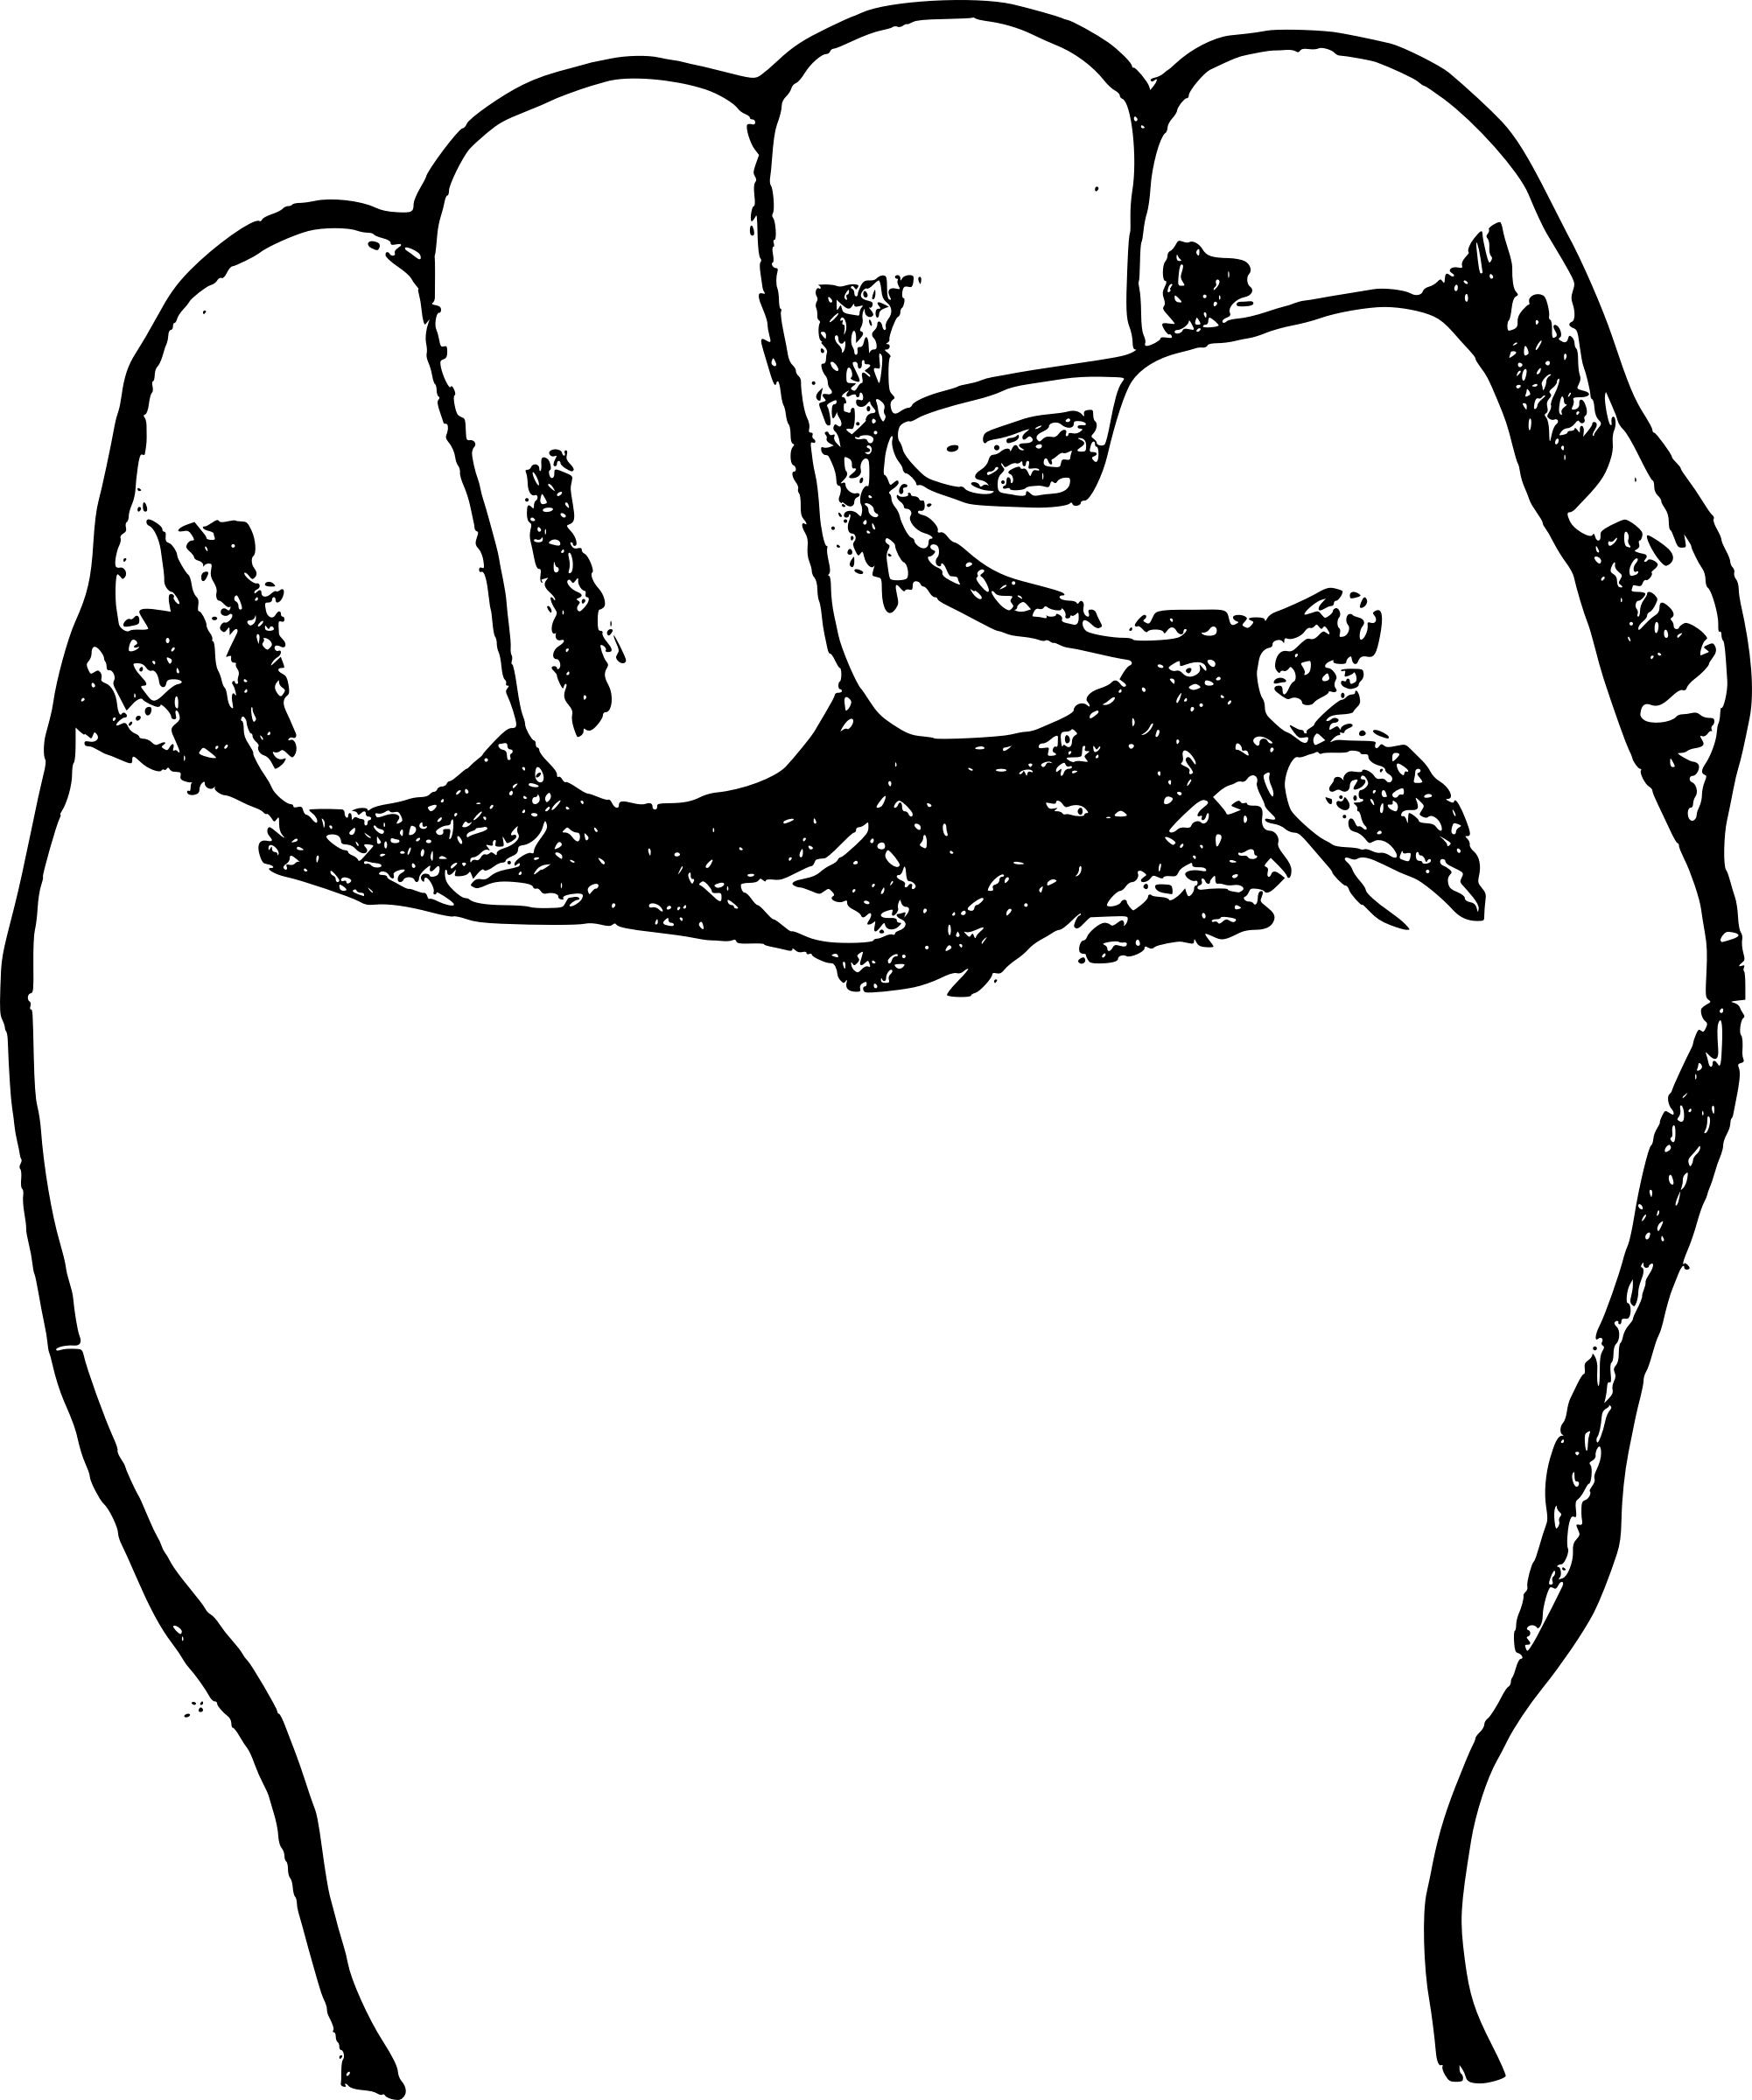 Fist in the Air png